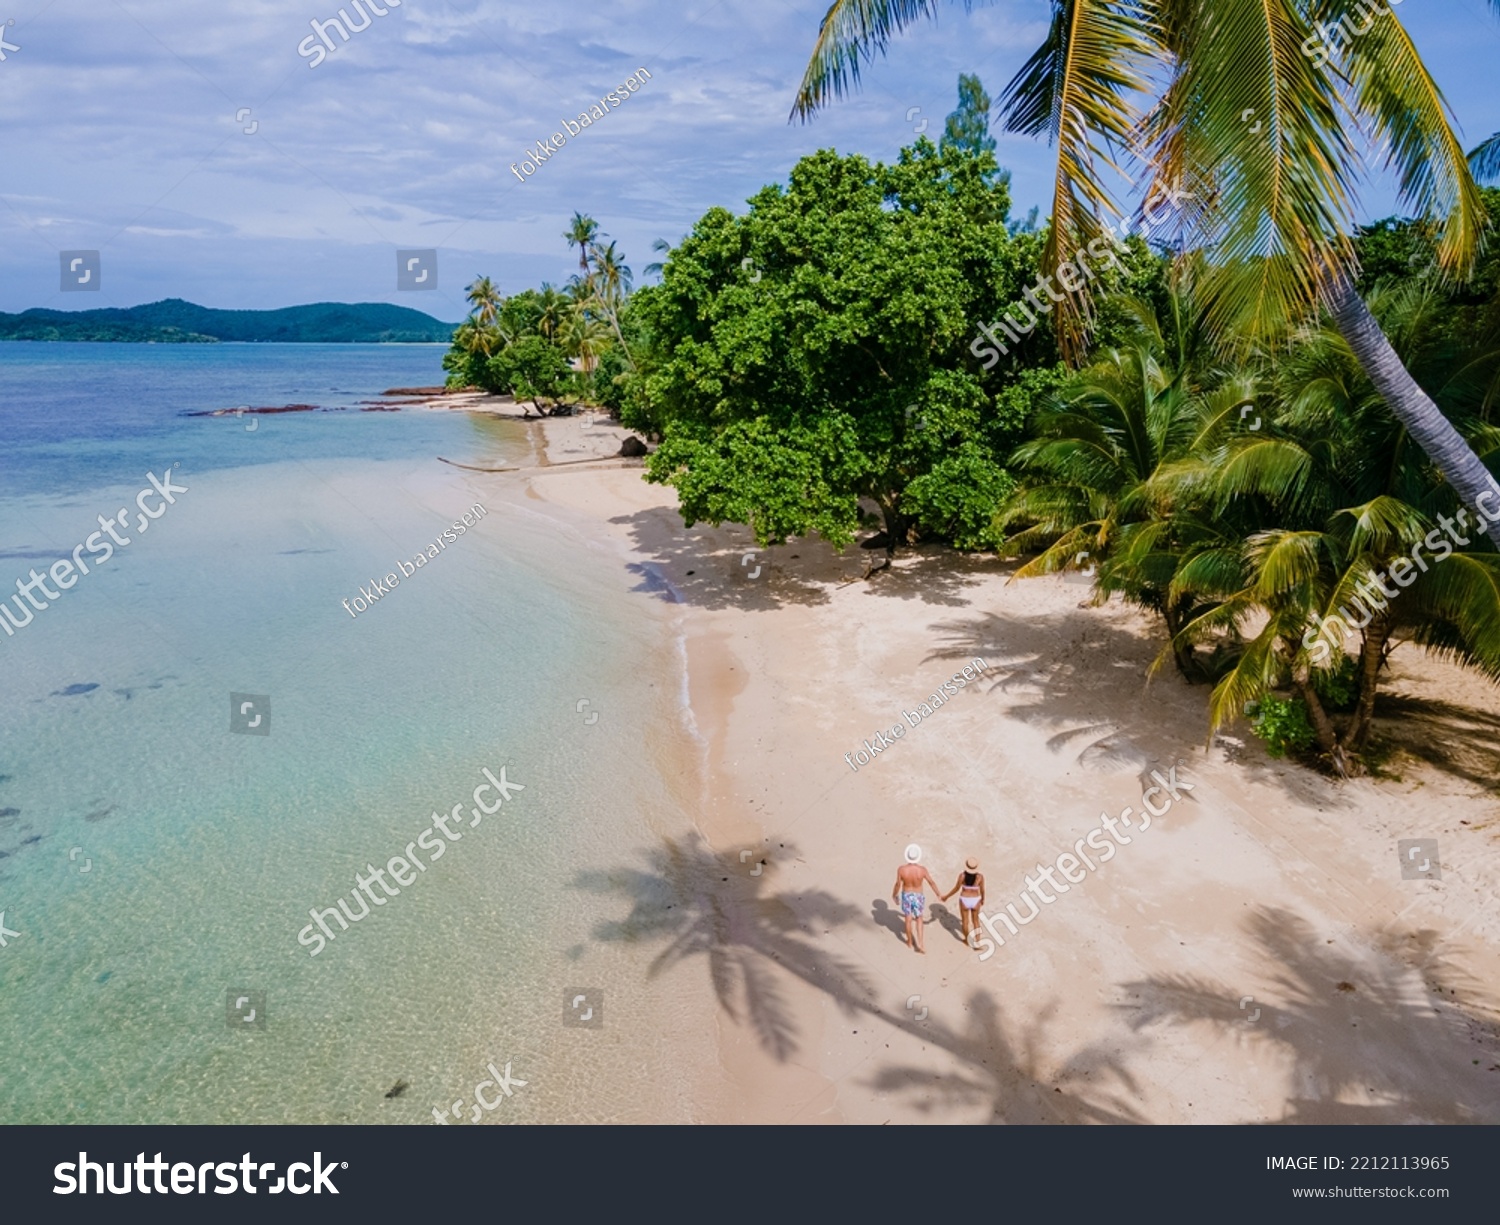 Tropical beach with palm trees, a couple of men and women on vacation at a tropical Island in Thailand Koh Mak. turquoise colored water and palm trees at a tropical island, drone aerial view #2212113965